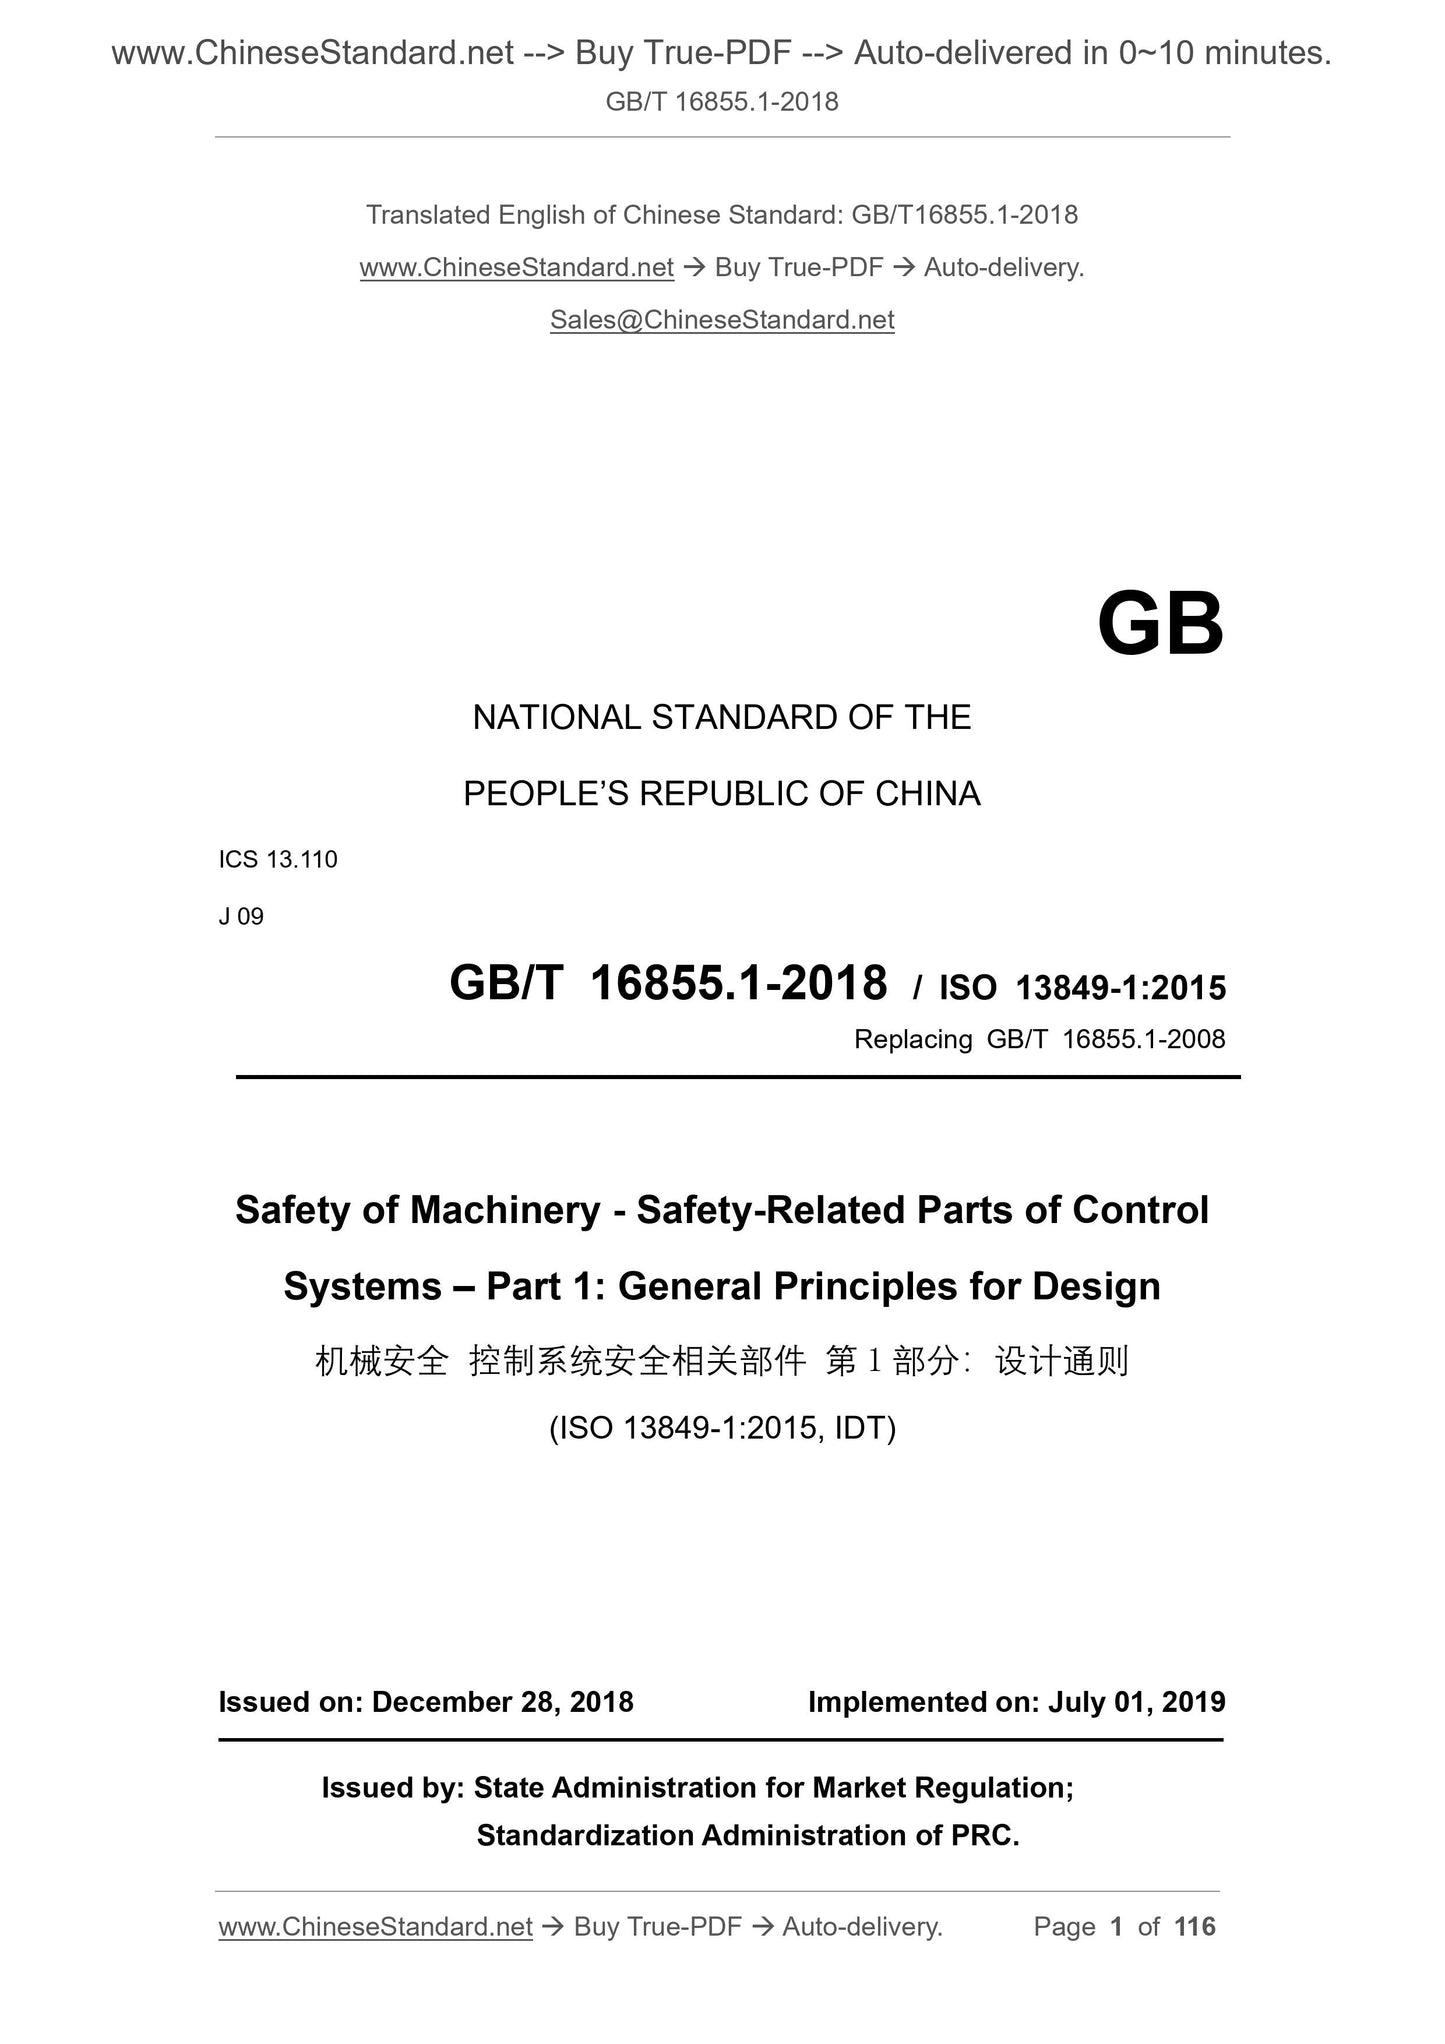 GB/T 16855.1-2018 Page 1